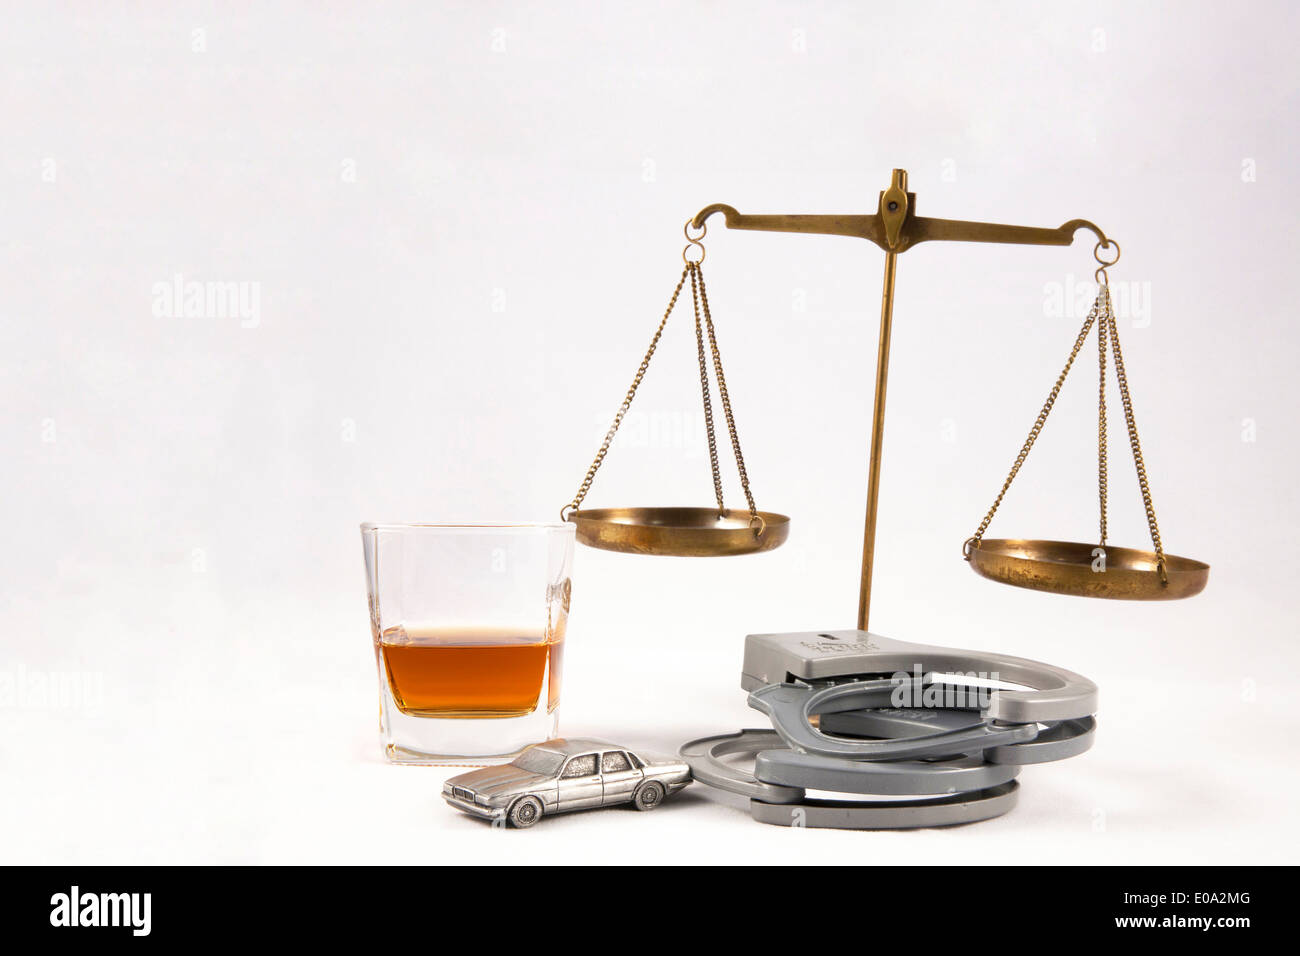 DUI lawyer concept of miniature car with alcohol bottle, handcuffs and legal scales Stock Photo